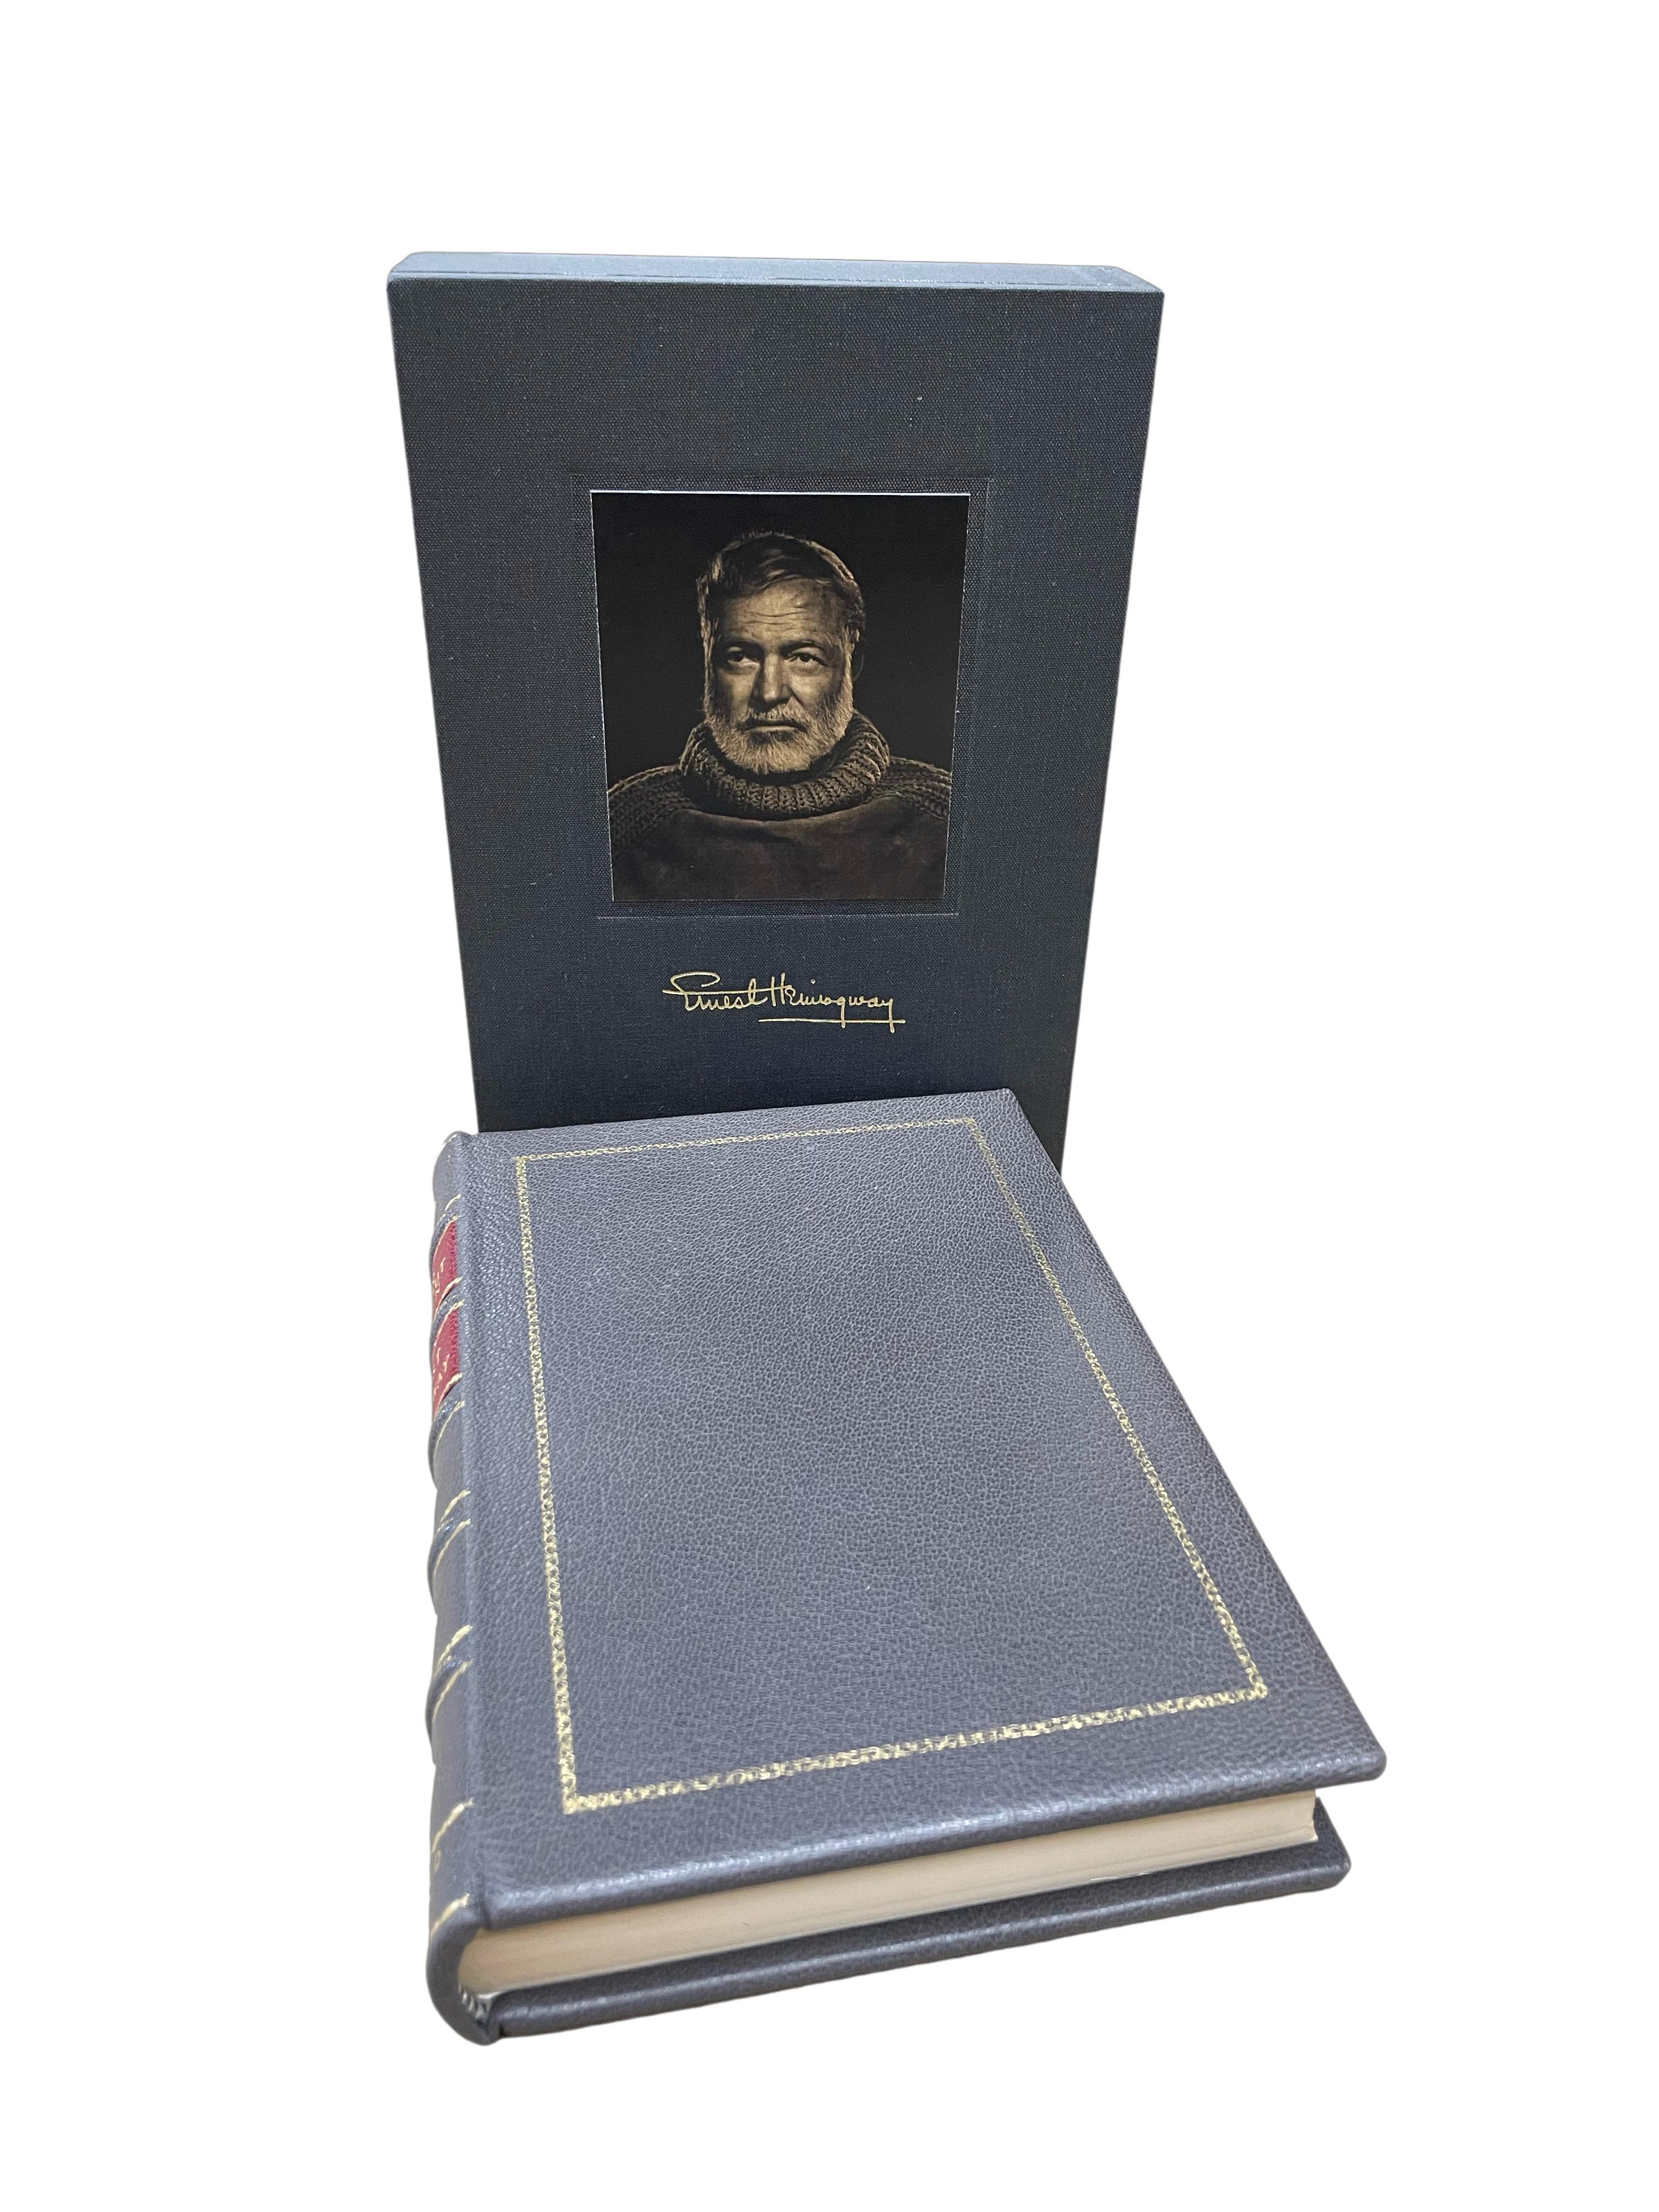 Ernest Hemingway. Men Without Women. New York: Charles Scribner's Sons, 1955. Uniform edition. Signed and inscribed by Hemingway on the free end page. Octavo. Rebound in full gray leather boards with gilt tooling and tiles, and a new archival